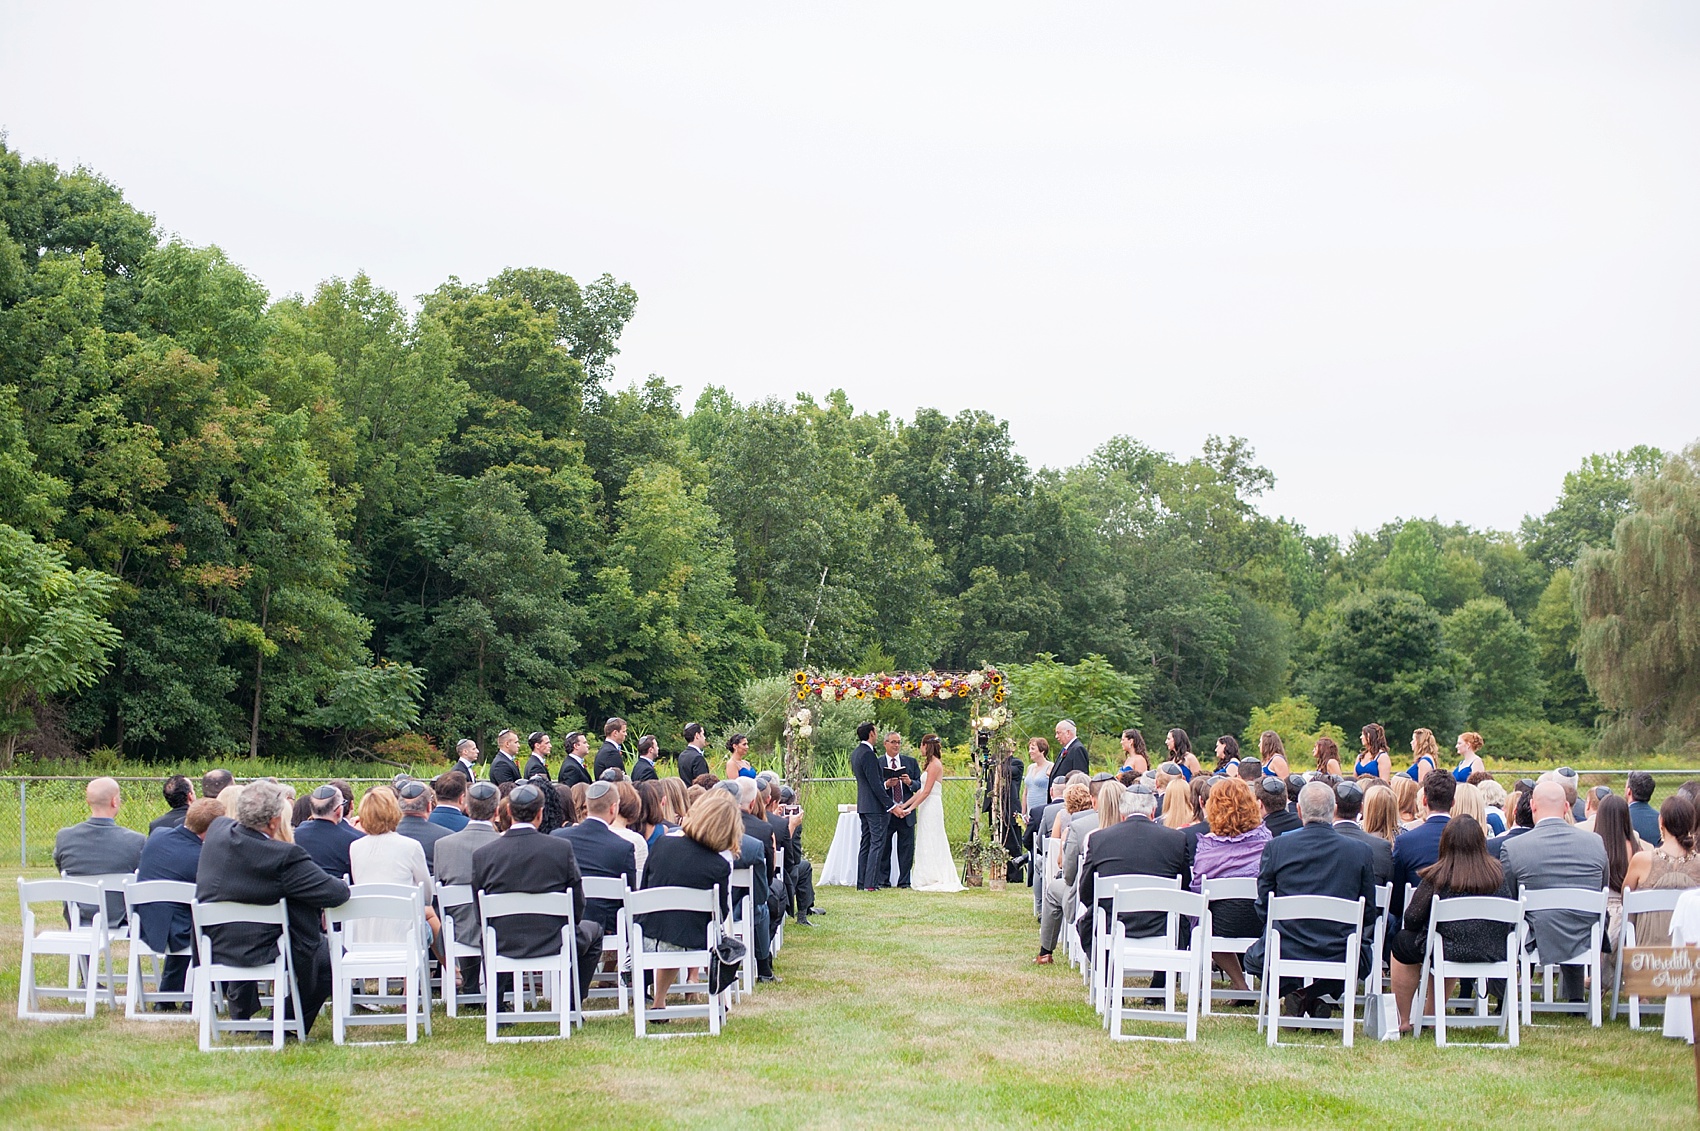 Perona Farms wedding photos outdoor ceremony for a colorful rustic summer celebration. Pictures by New Jersey photographer Mikkel Paige Photography.